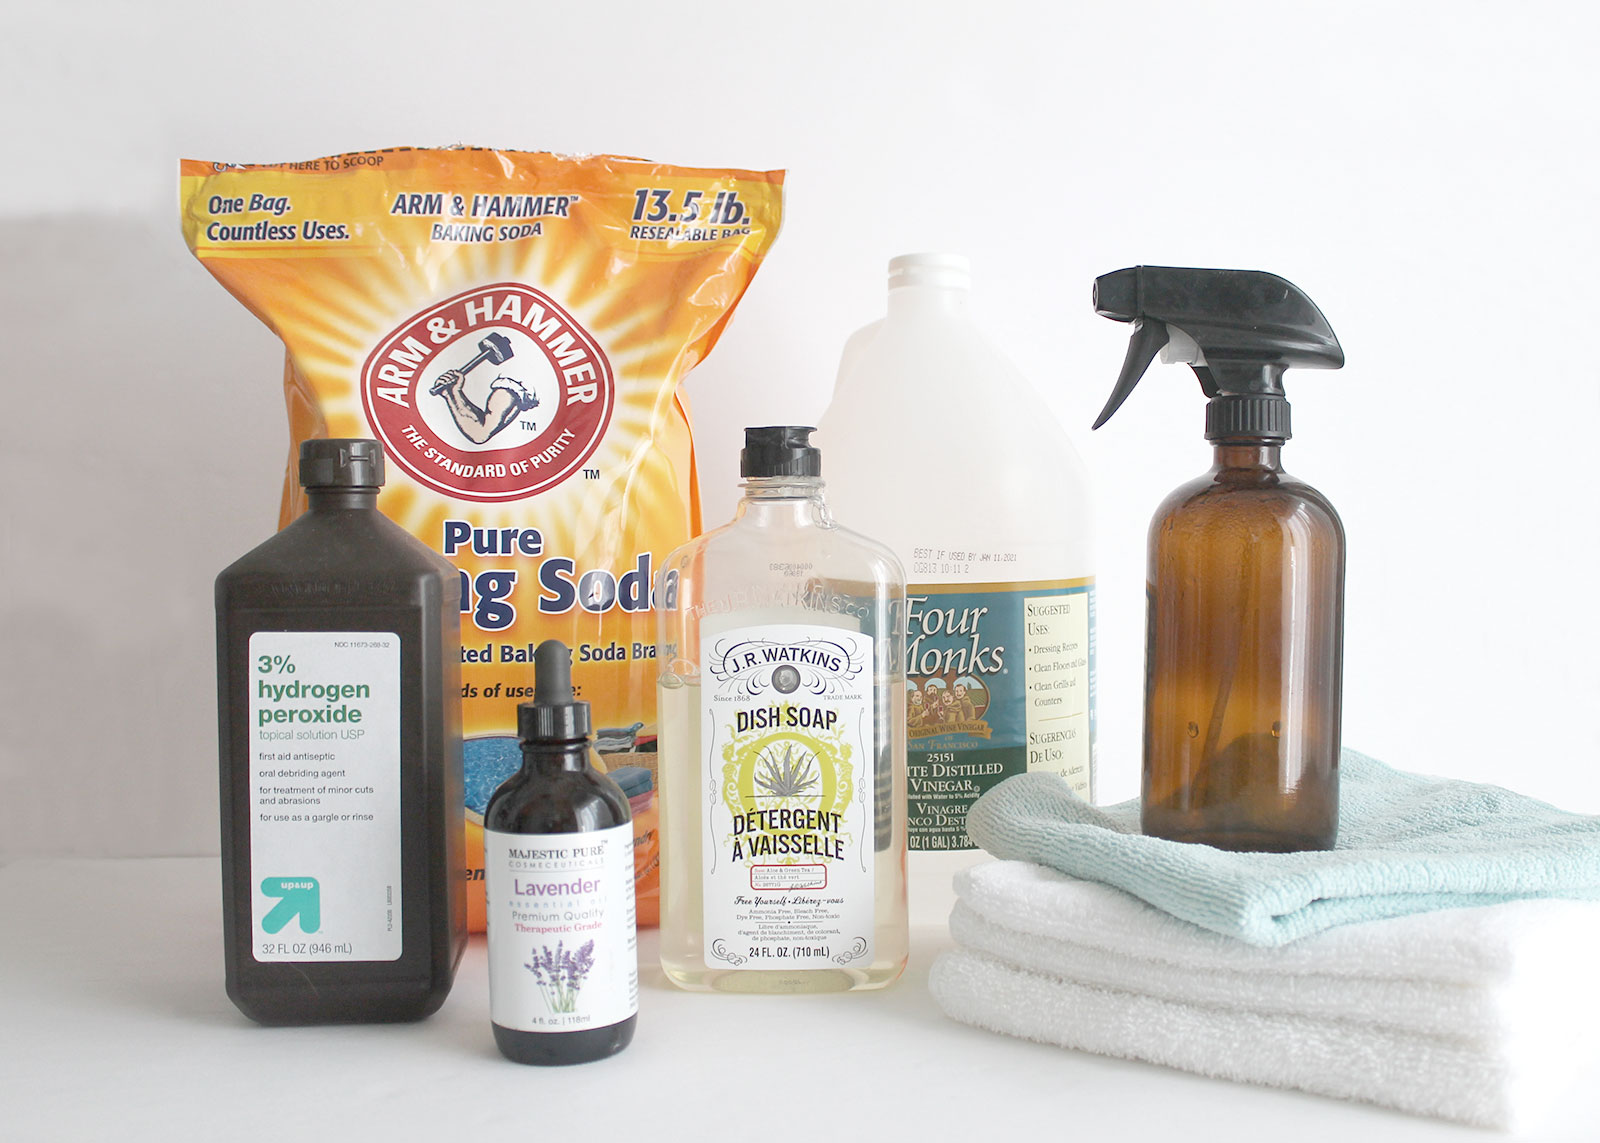 20 Zero Waste Cleaning Products for the Home